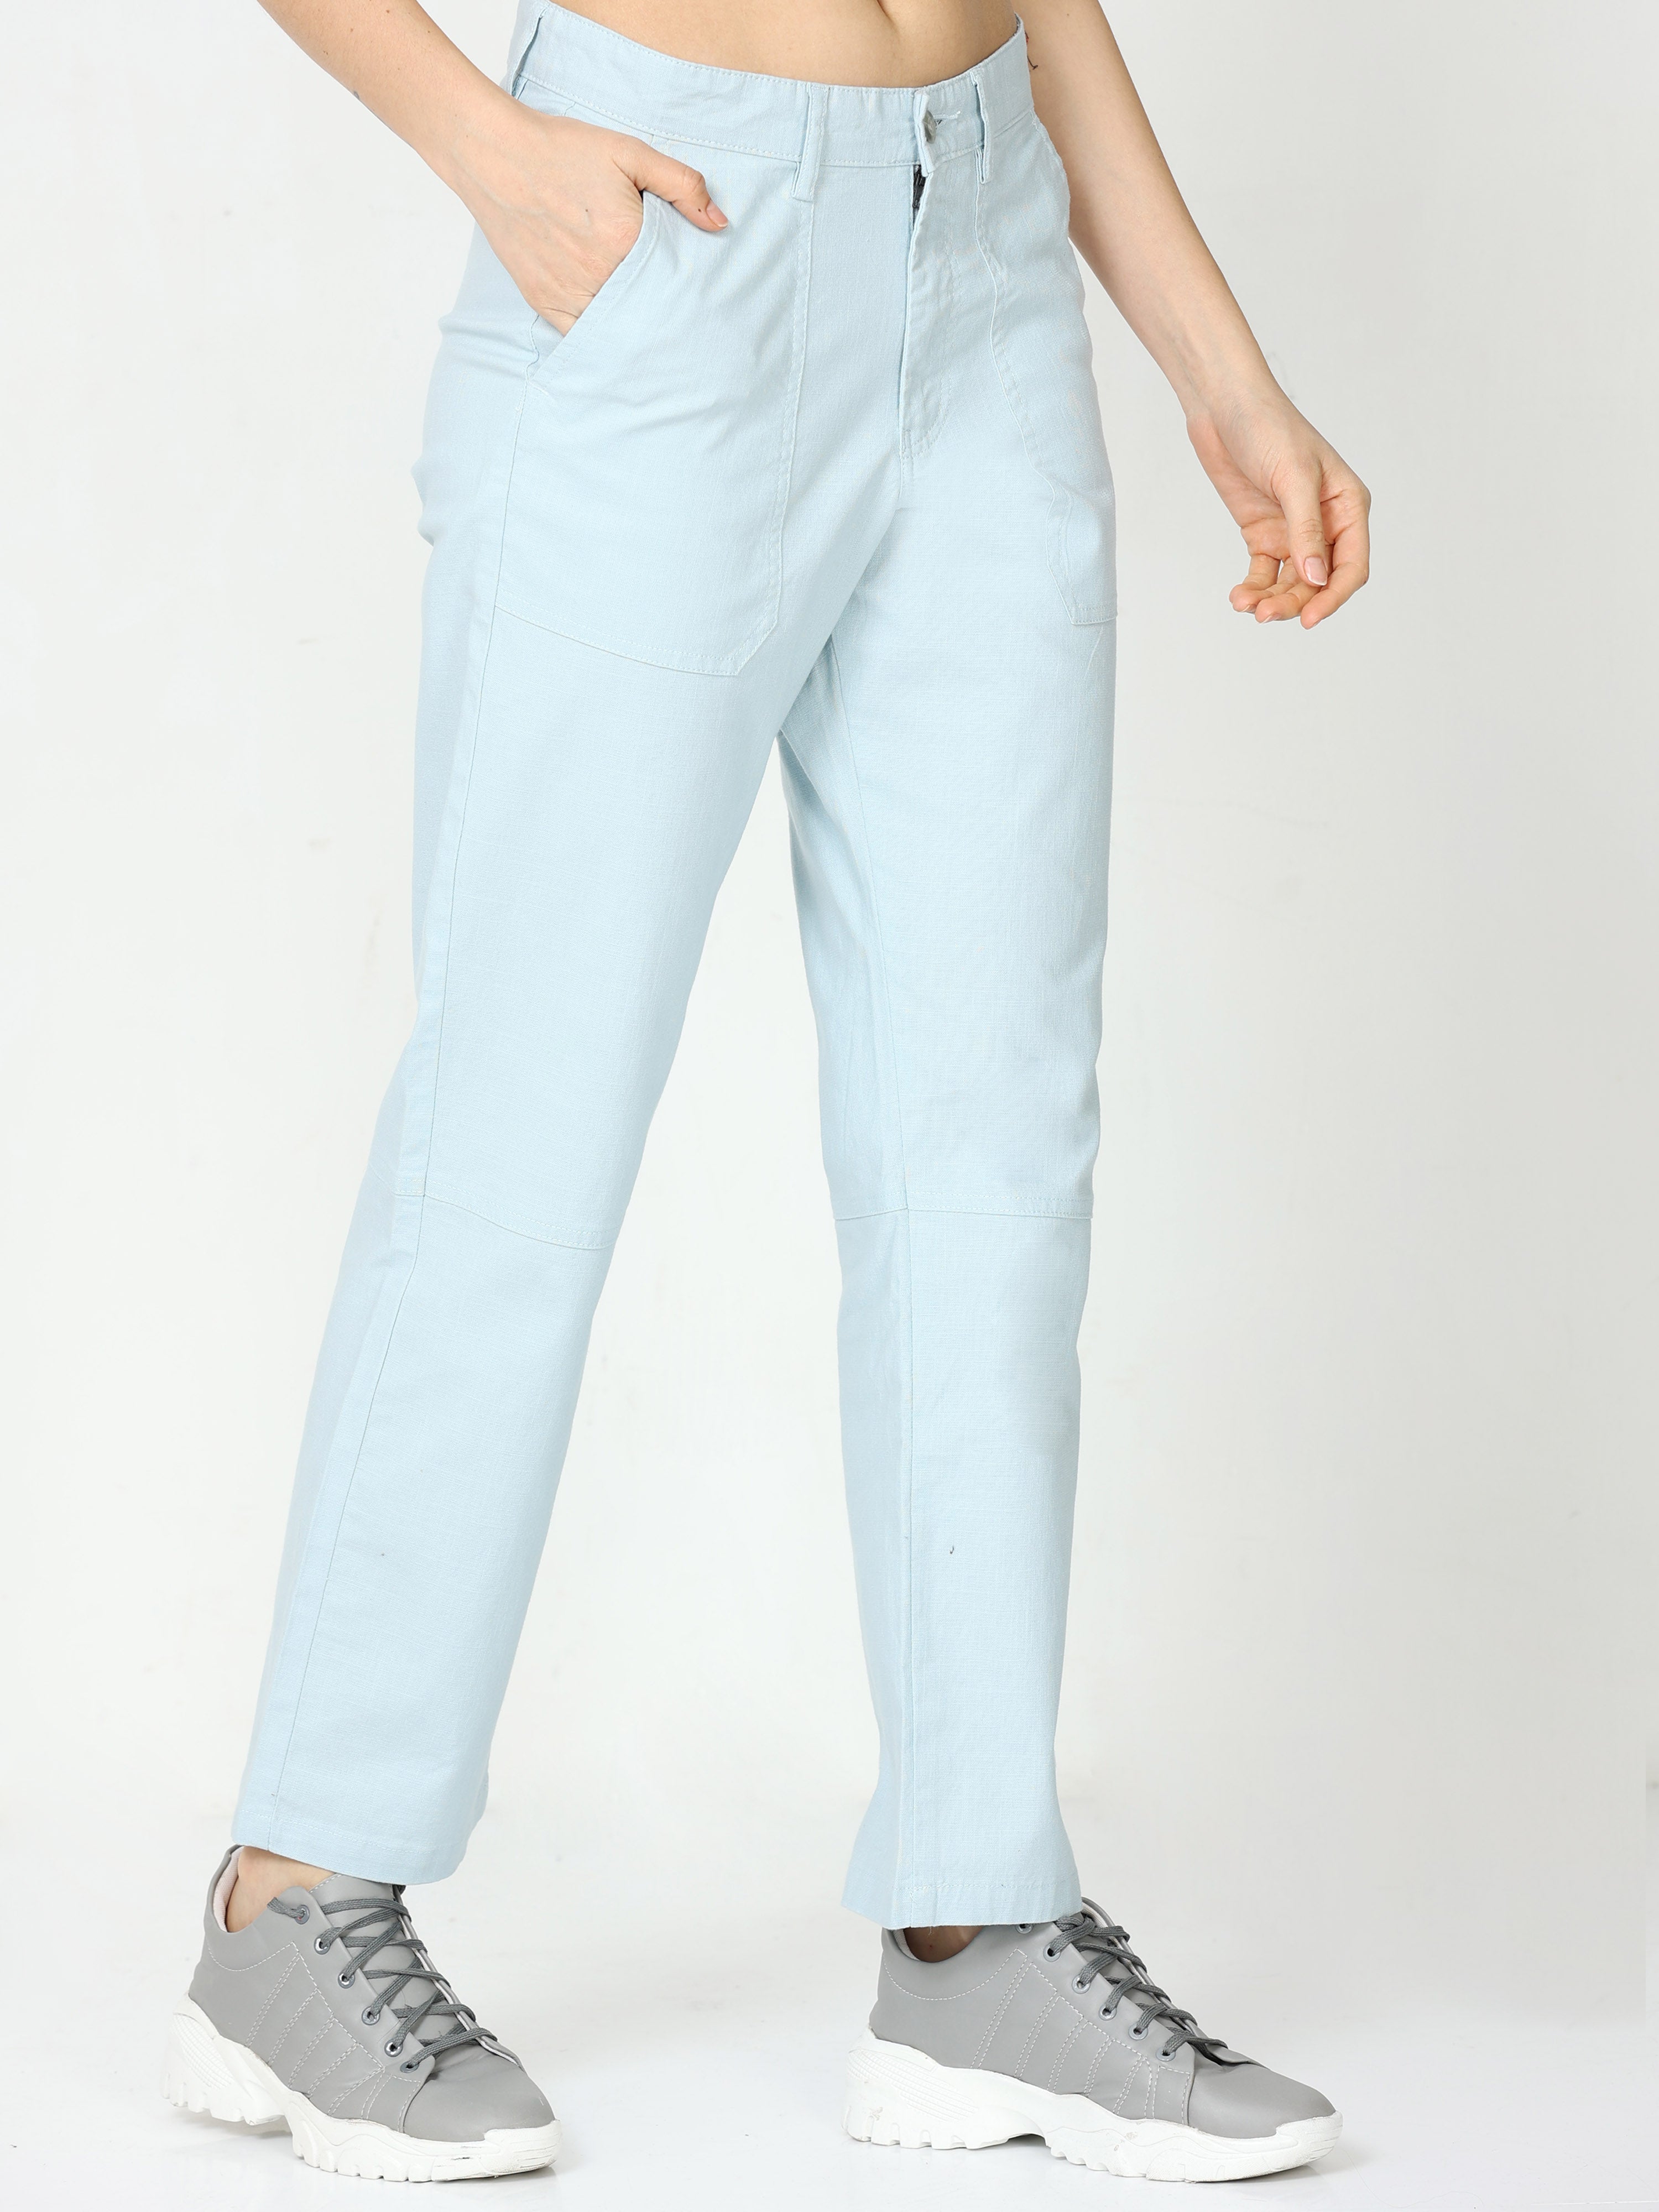 Buy Off White Ankle-Length Pants Online - RK India Store View